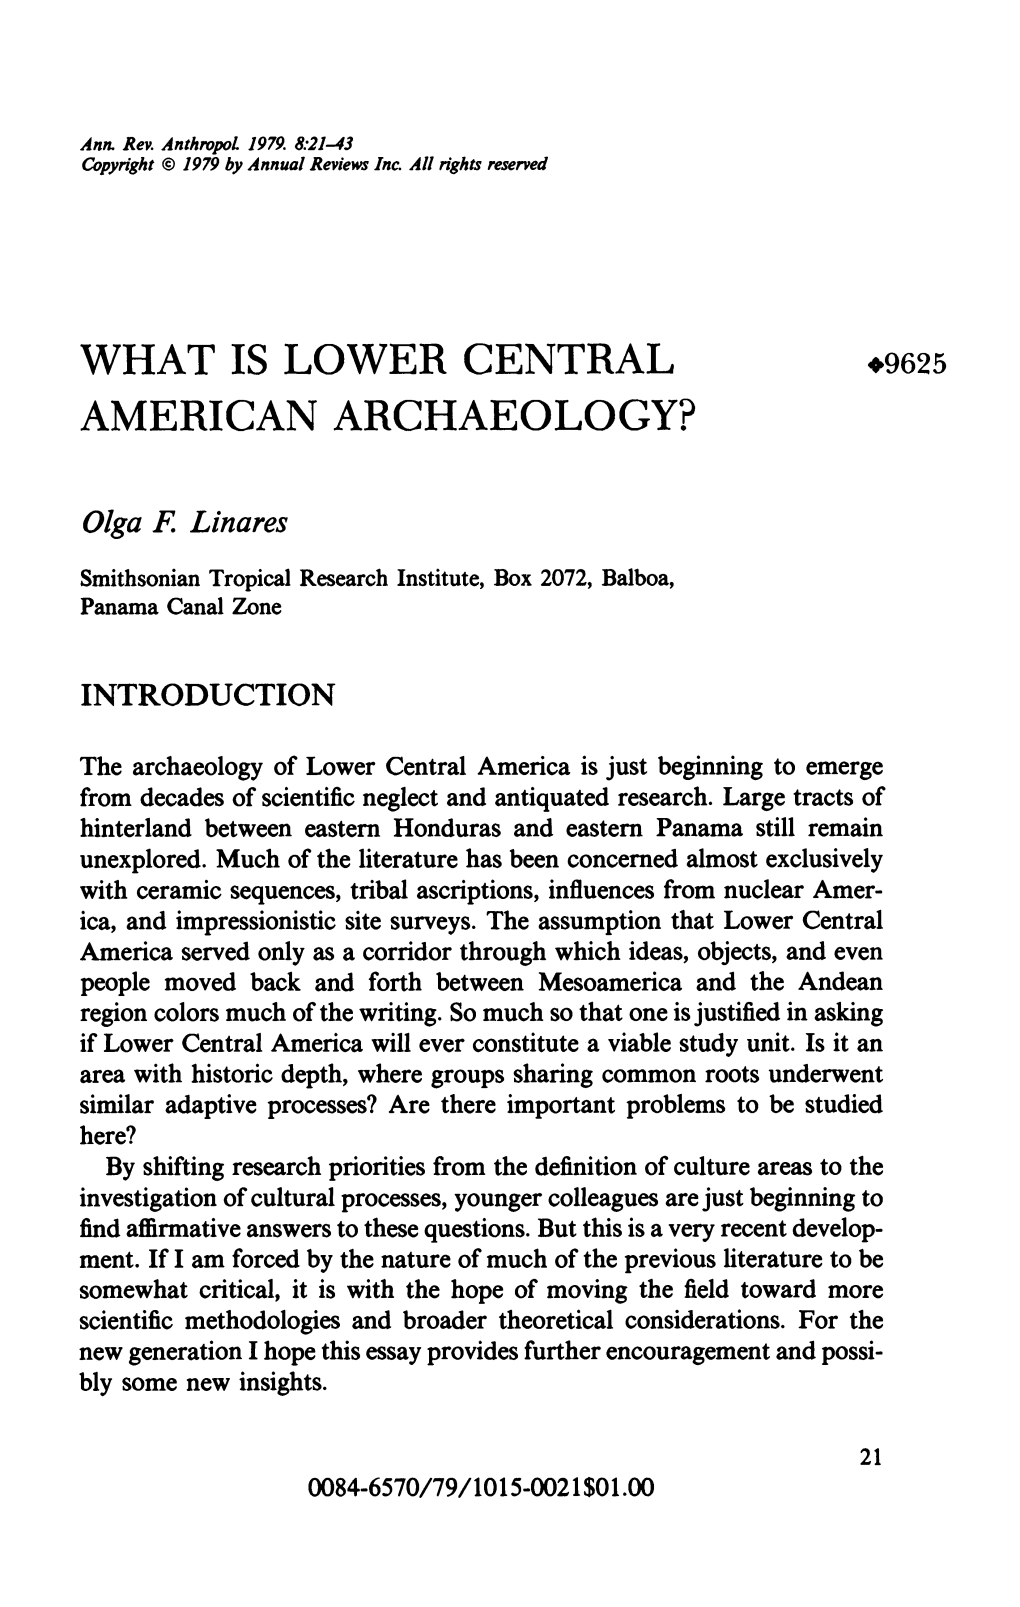 What Is Lower Central American Archaeology?